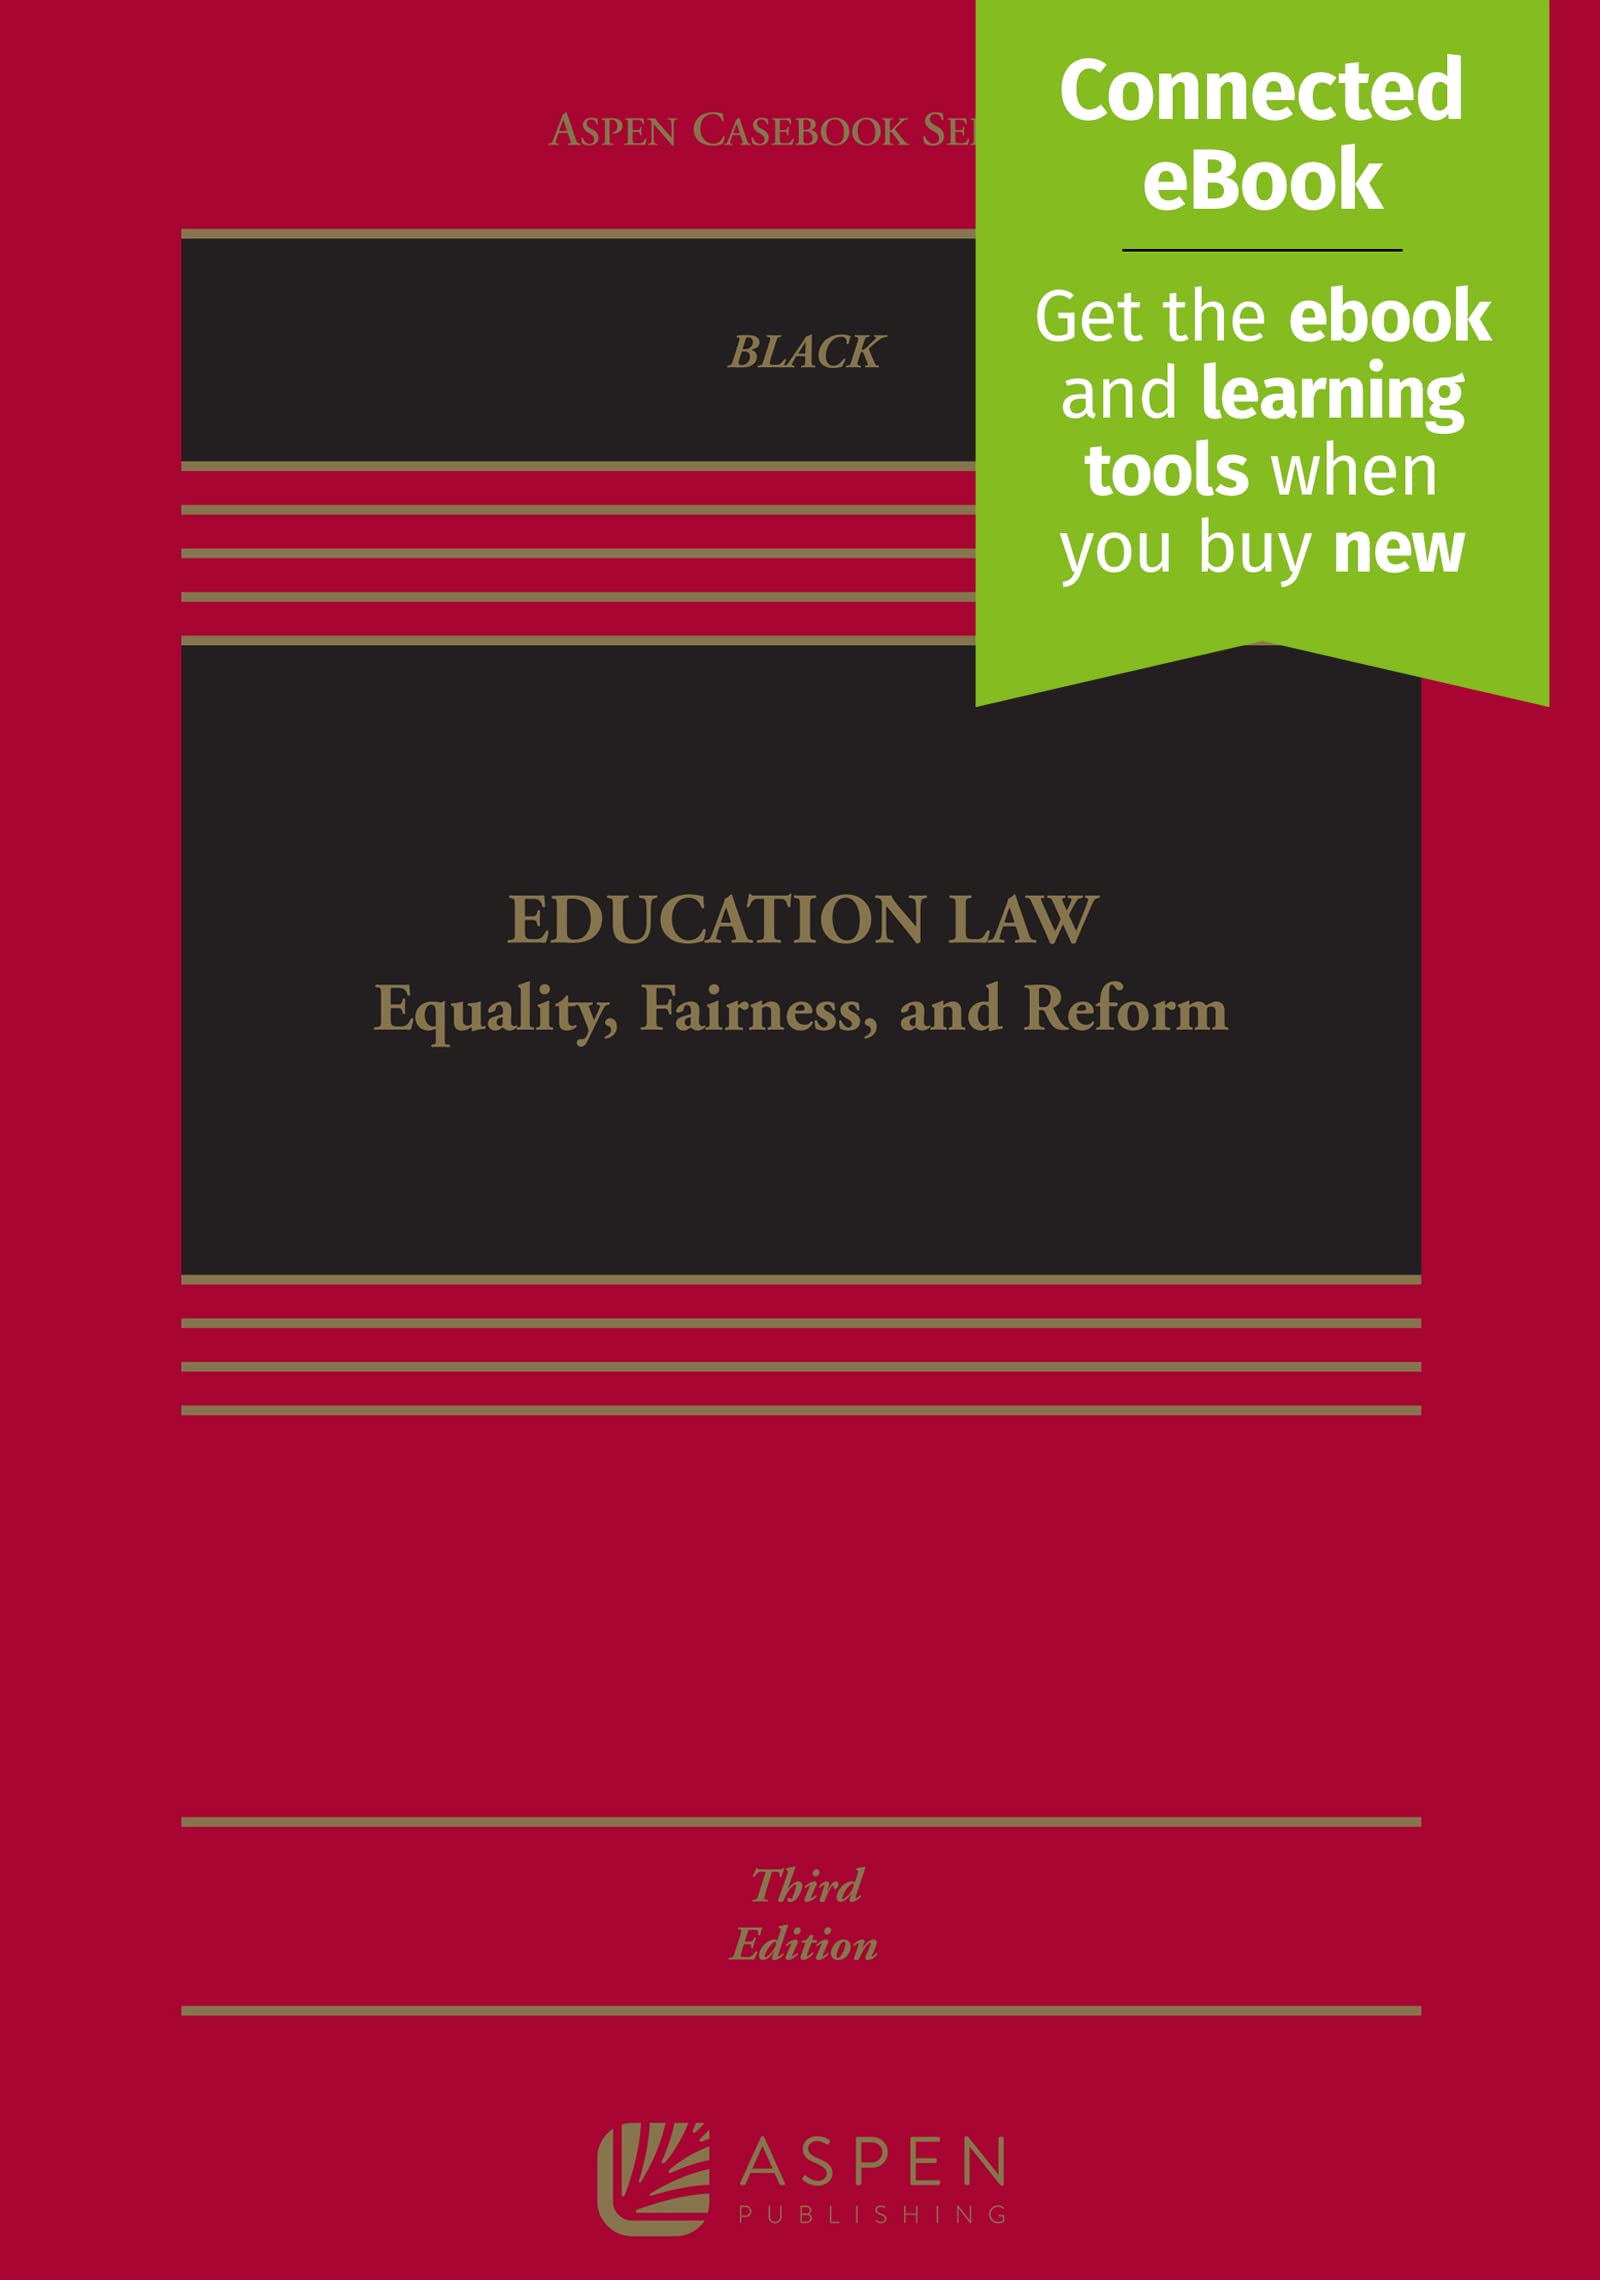 Education Law: Equality, Fairness, and Reform [Connected eBook] (Aspen Casebook)